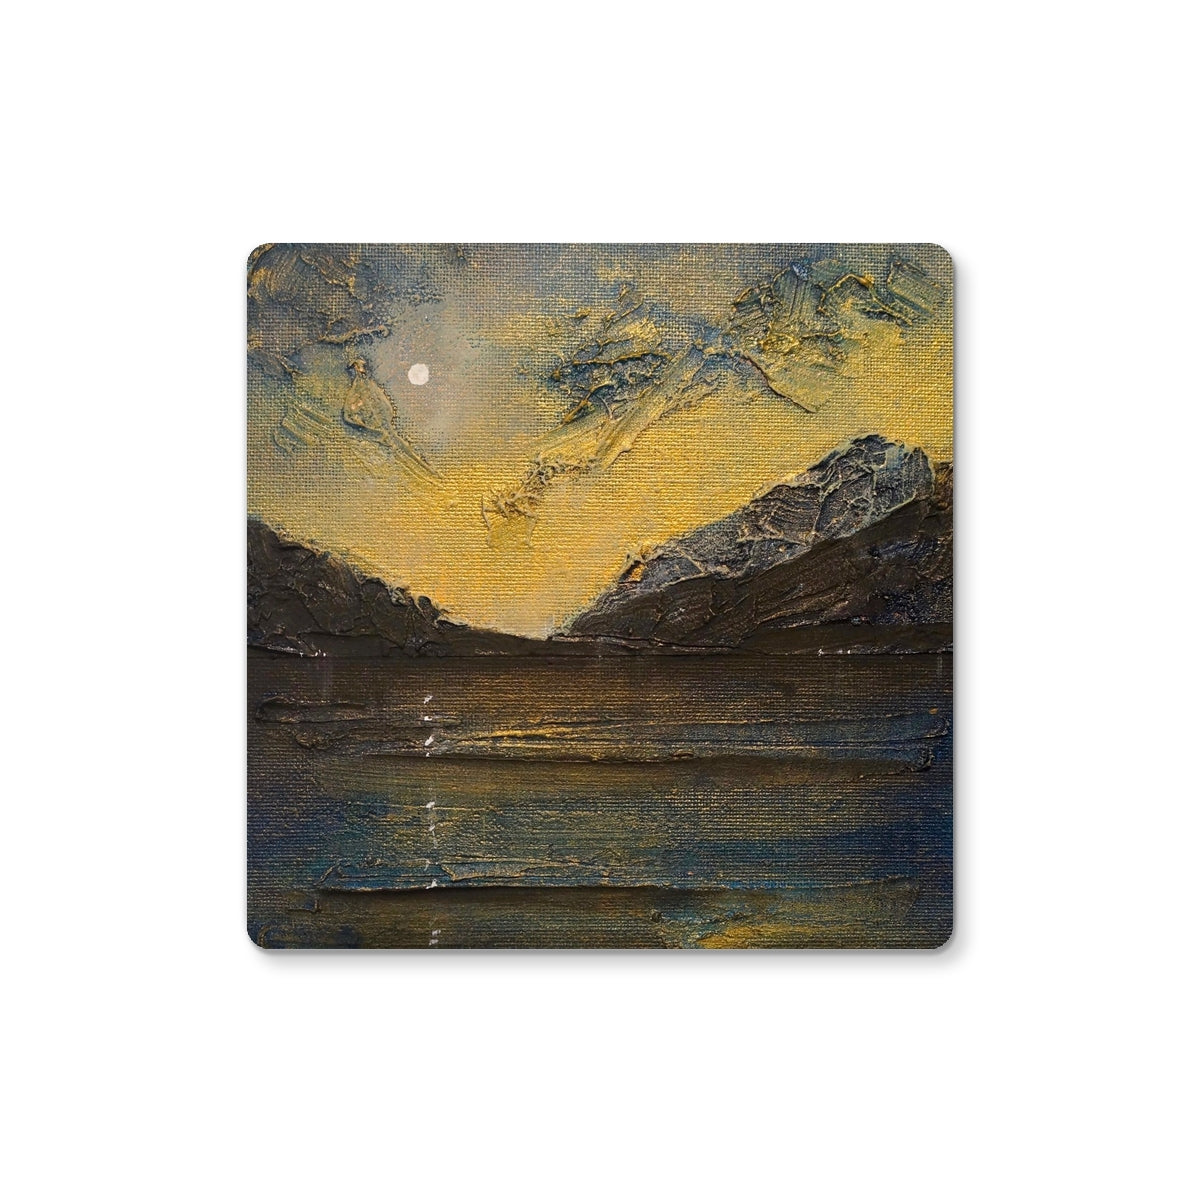 Loch Lomond Moonlight Art Gifts Coaster-Coasters-Scottish Lochs & Mountains Art Gallery-2 Coasters-Paintings, Prints, Homeware, Art Gifts From Scotland By Scottish Artist Kevin Hunter